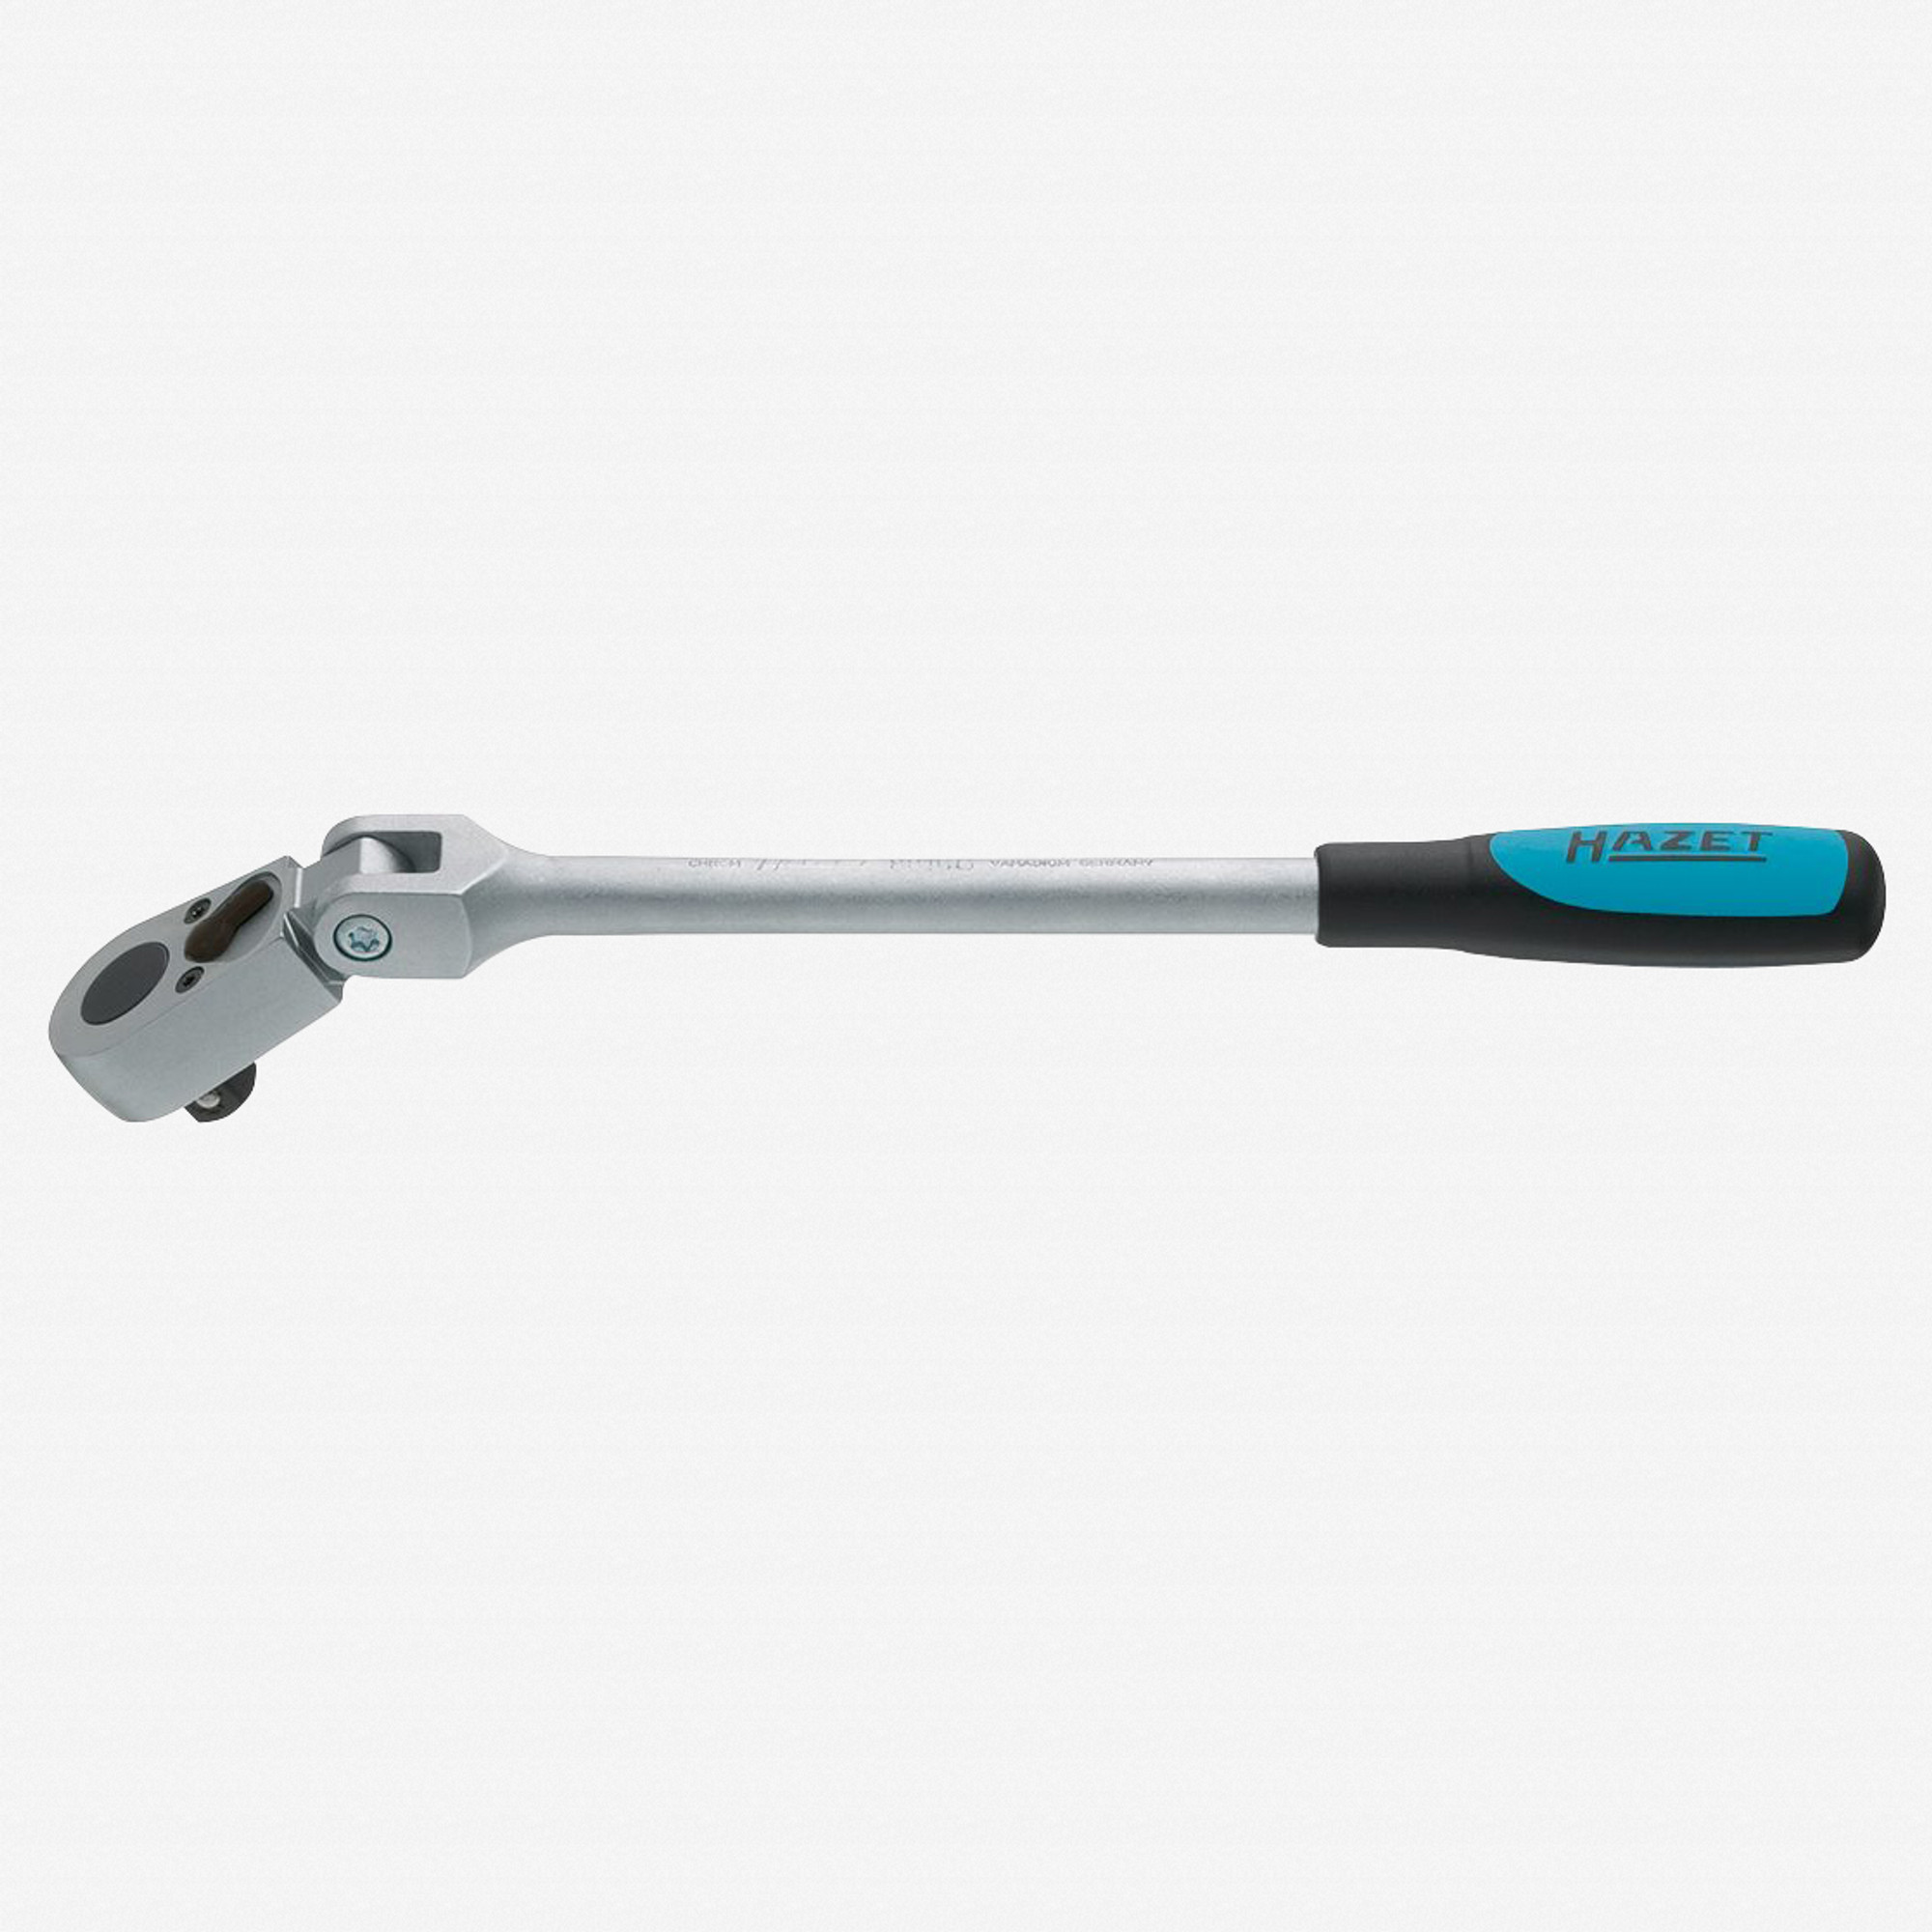 Hazet 8816G 3/8" Reversible ratchet with hinge joint  - KC Tool